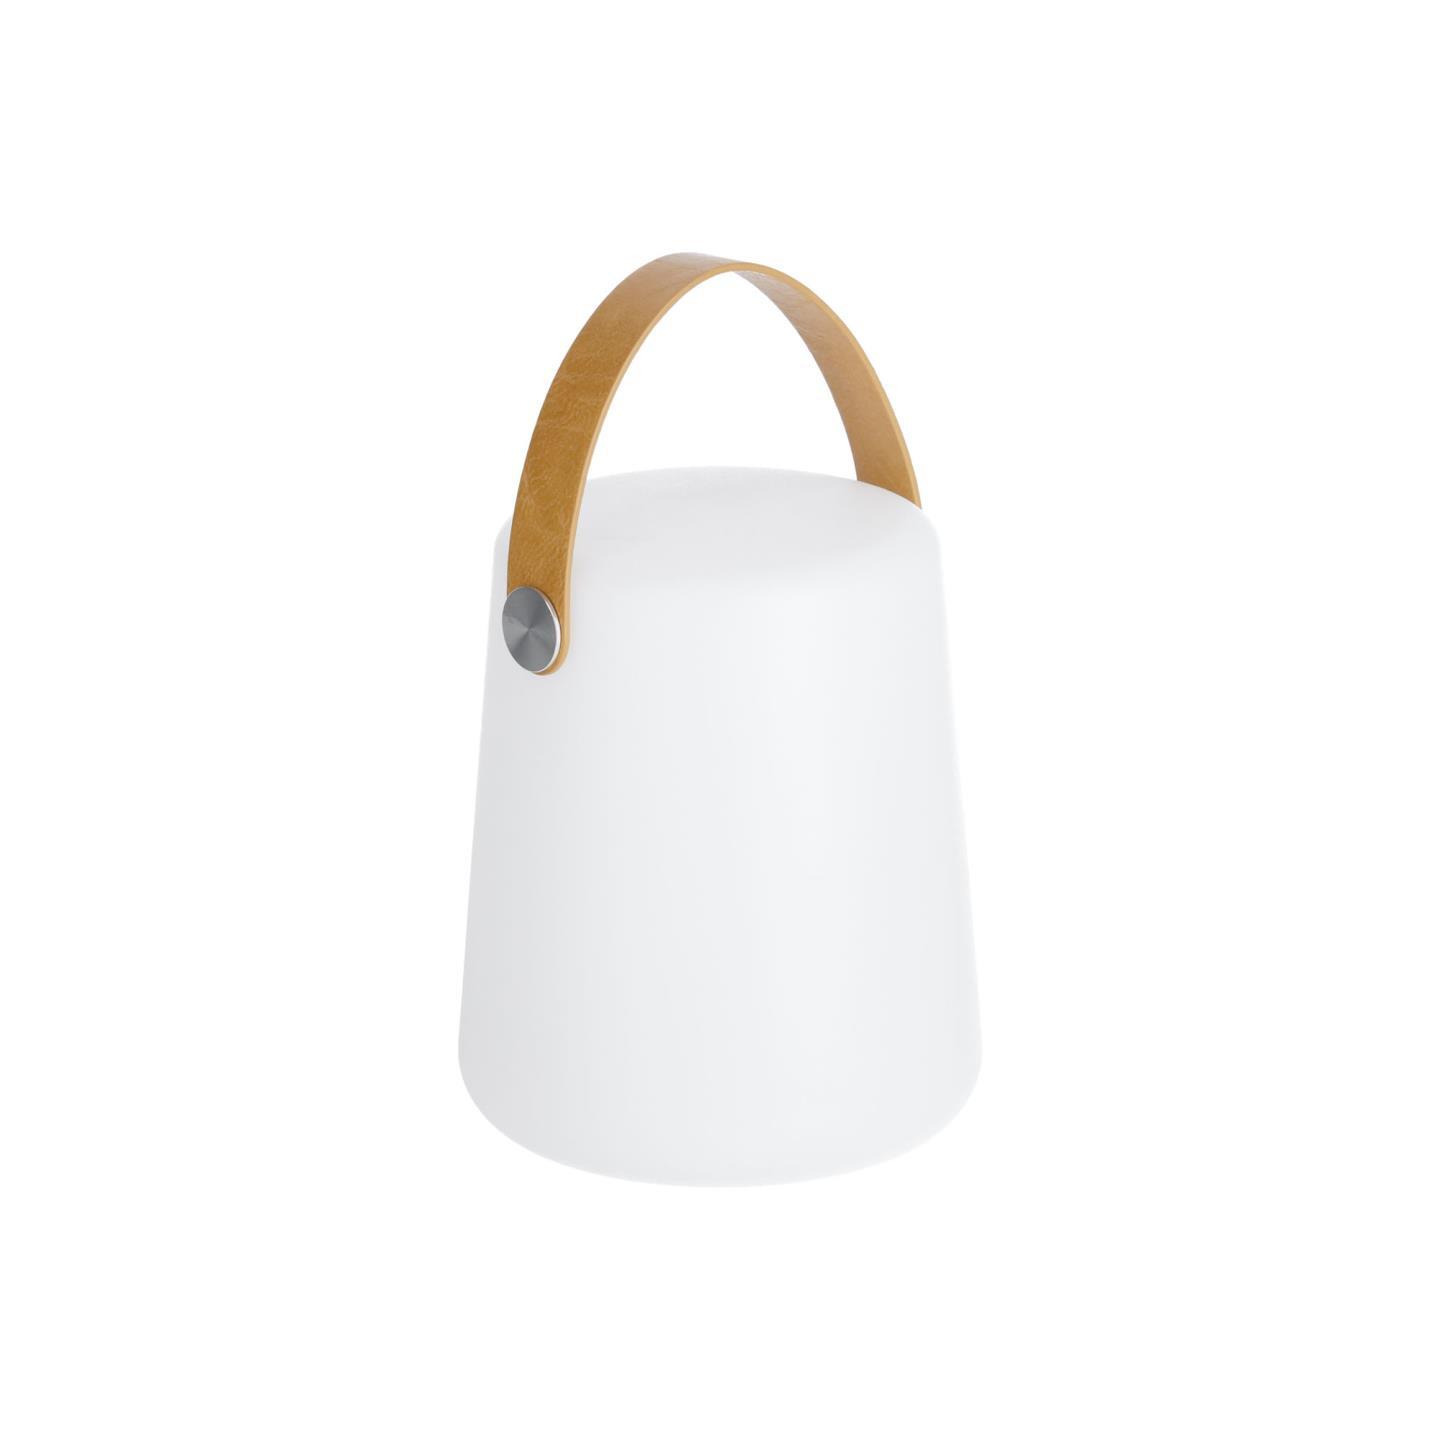 Dialma table lamp with brown flex